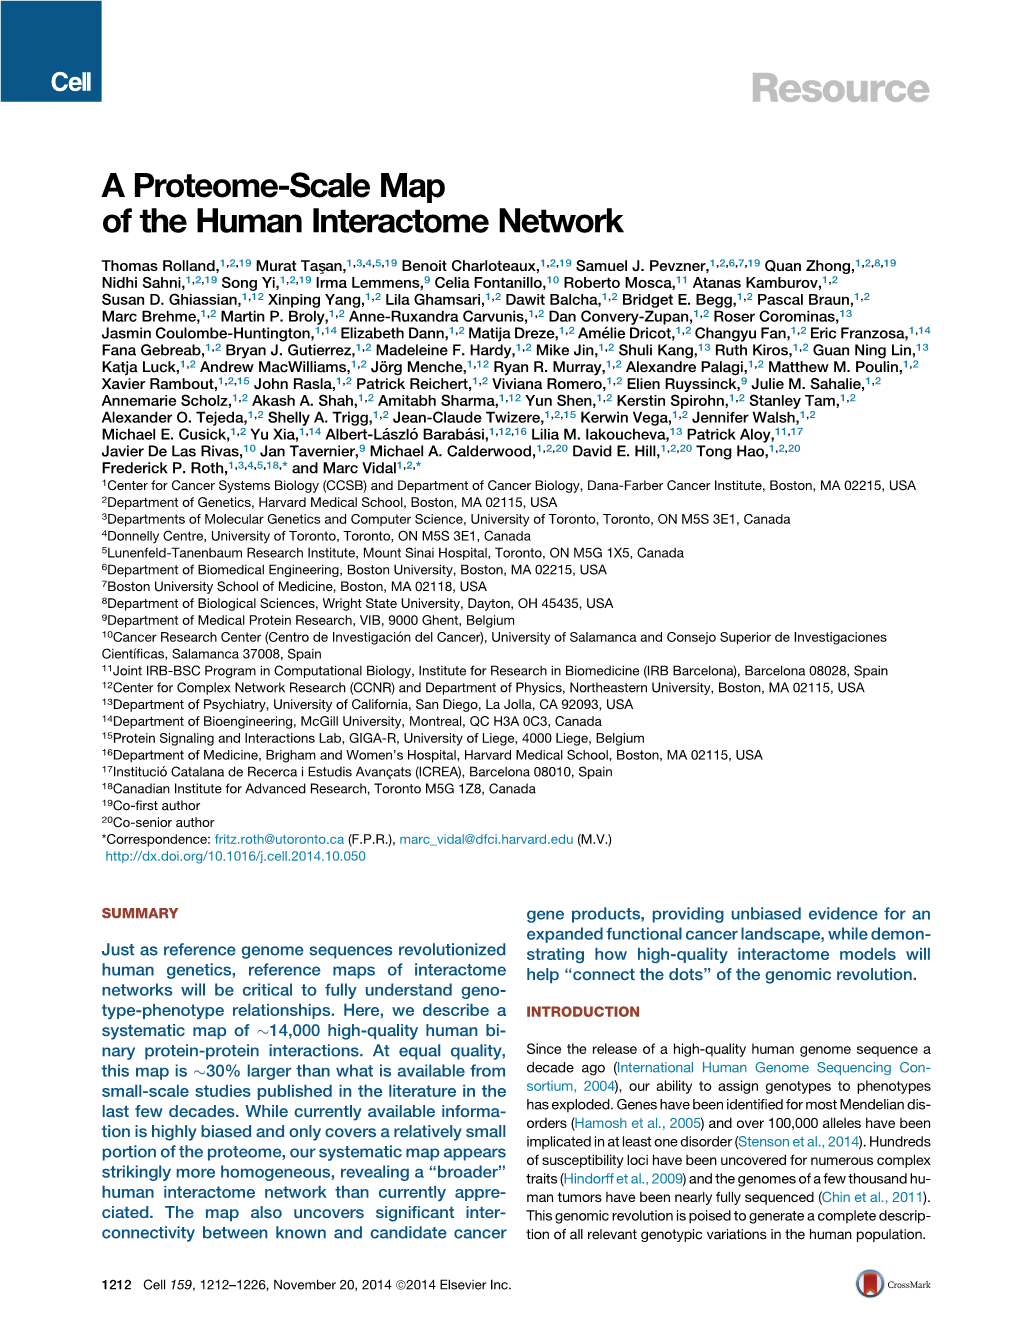 A Proteome-Scale Map of the Human Interactome Network